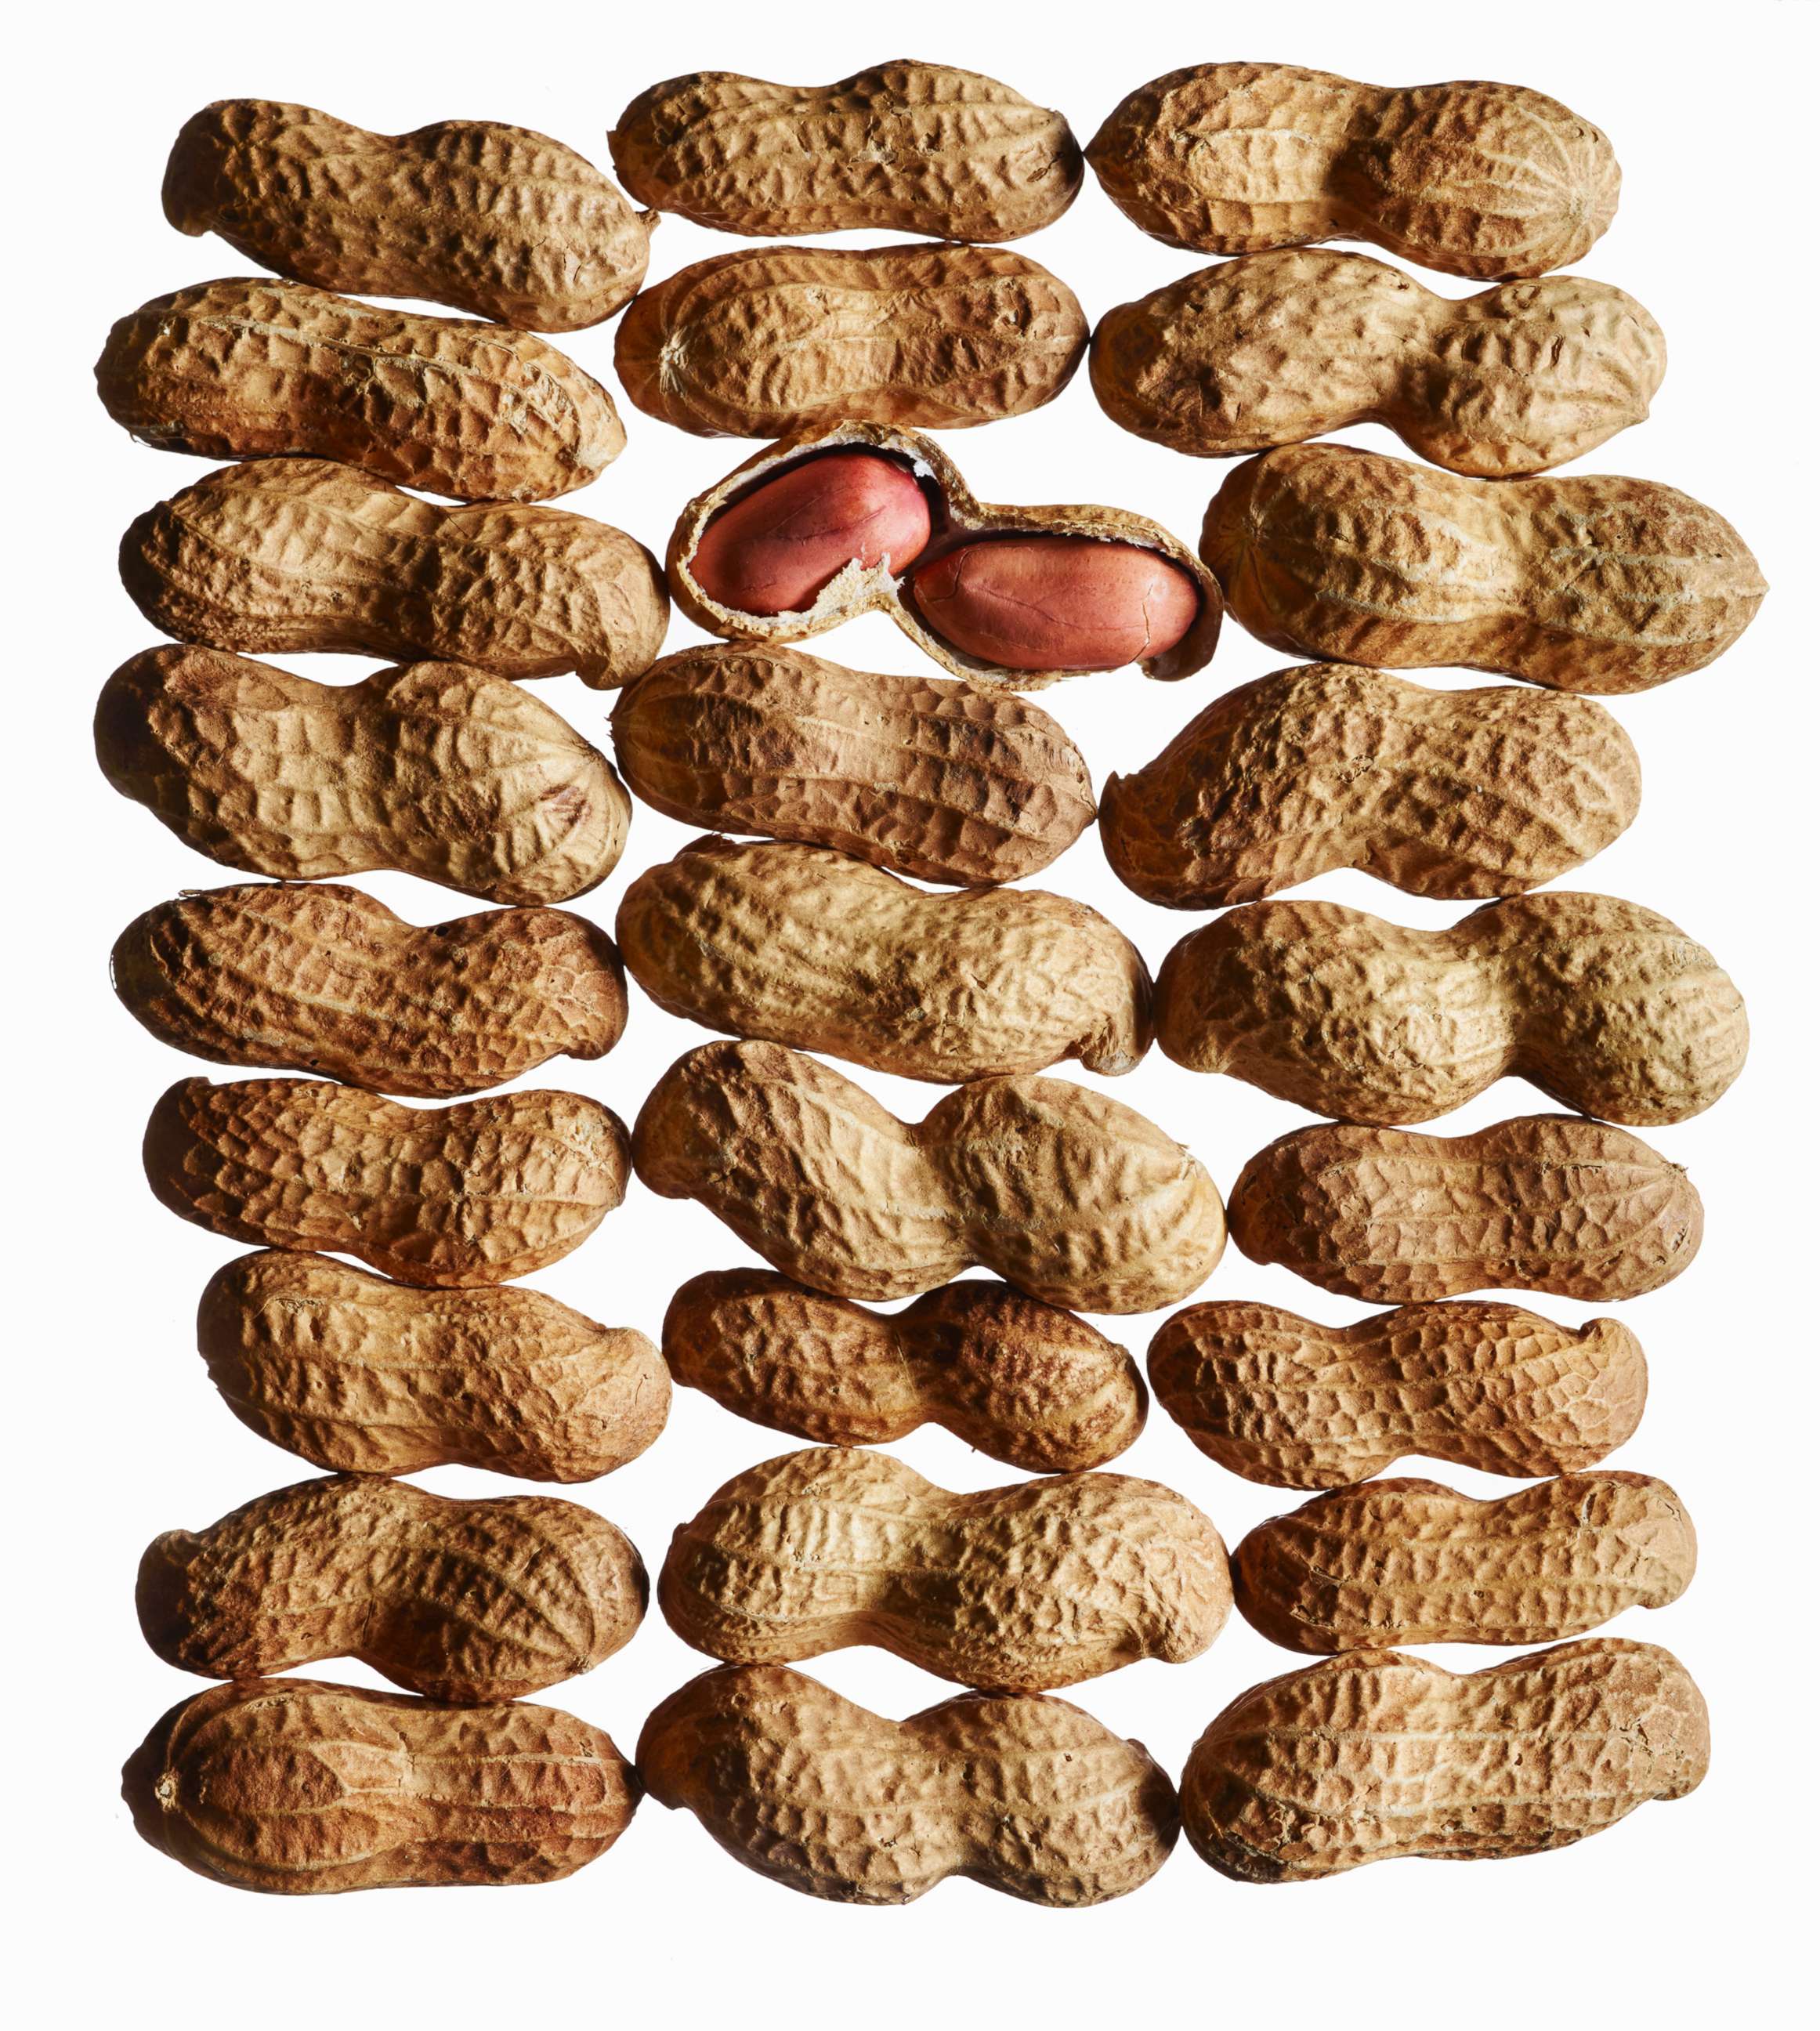 PHOTO: Peanuts are pictured in an undated stock photo.